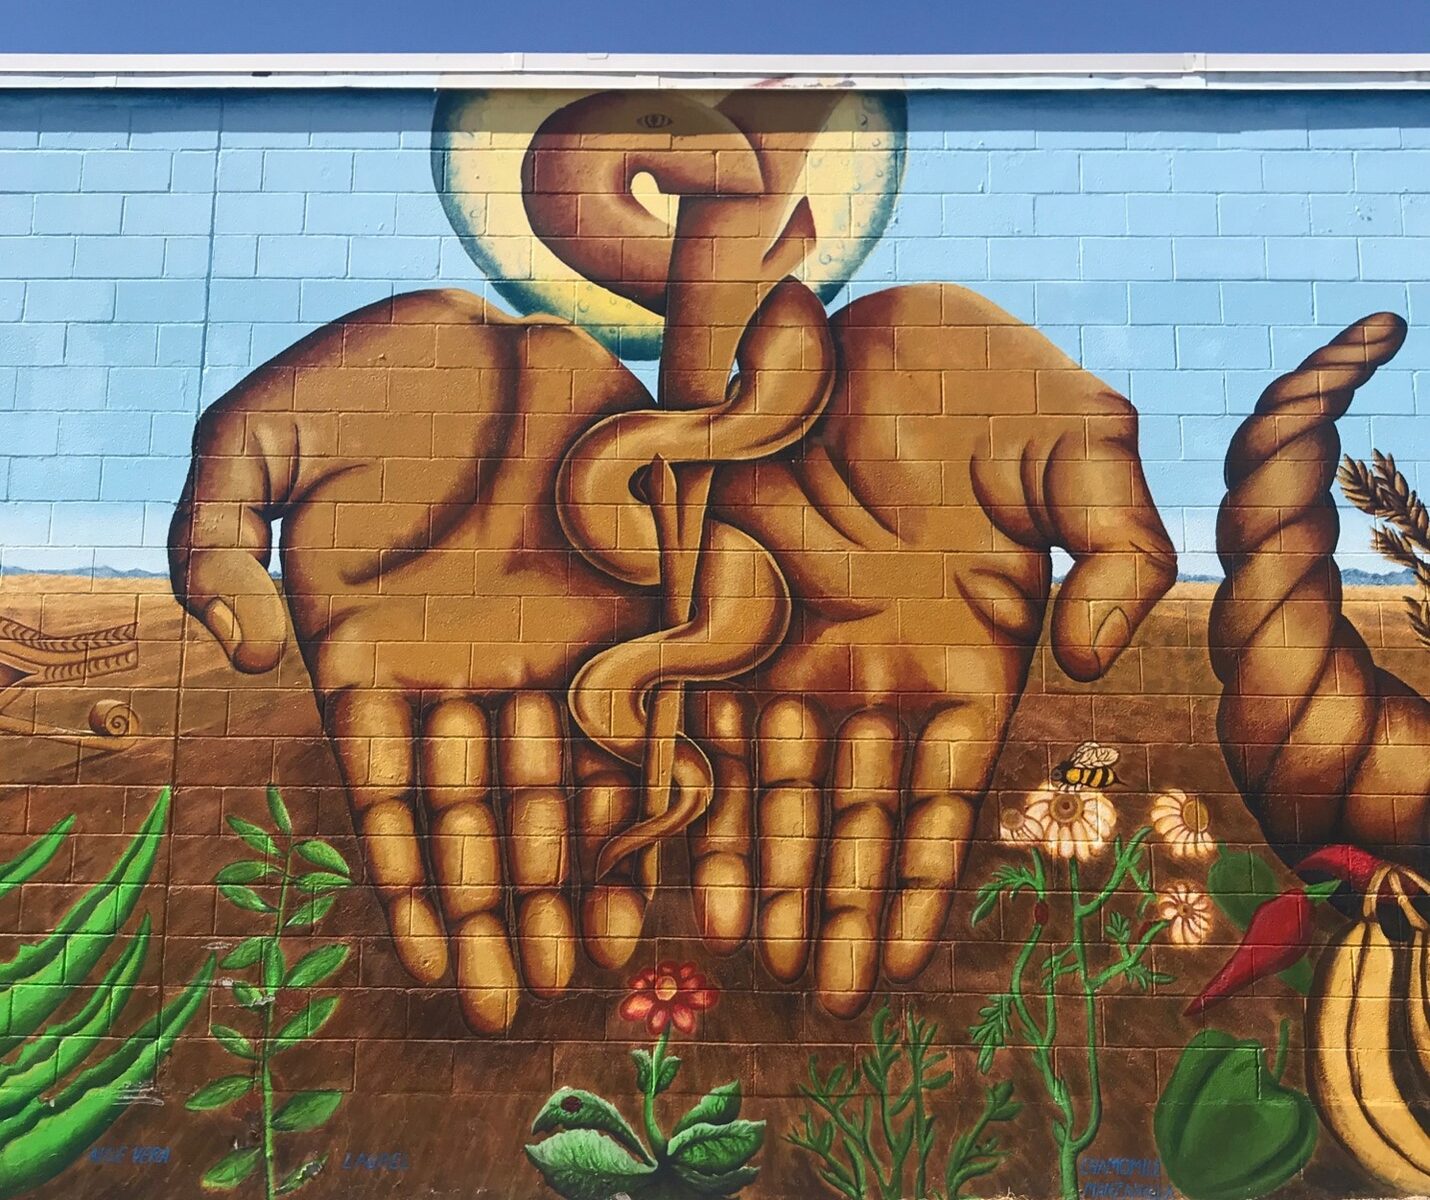 Healing Hands and Rod of Asclepius in desert landscape